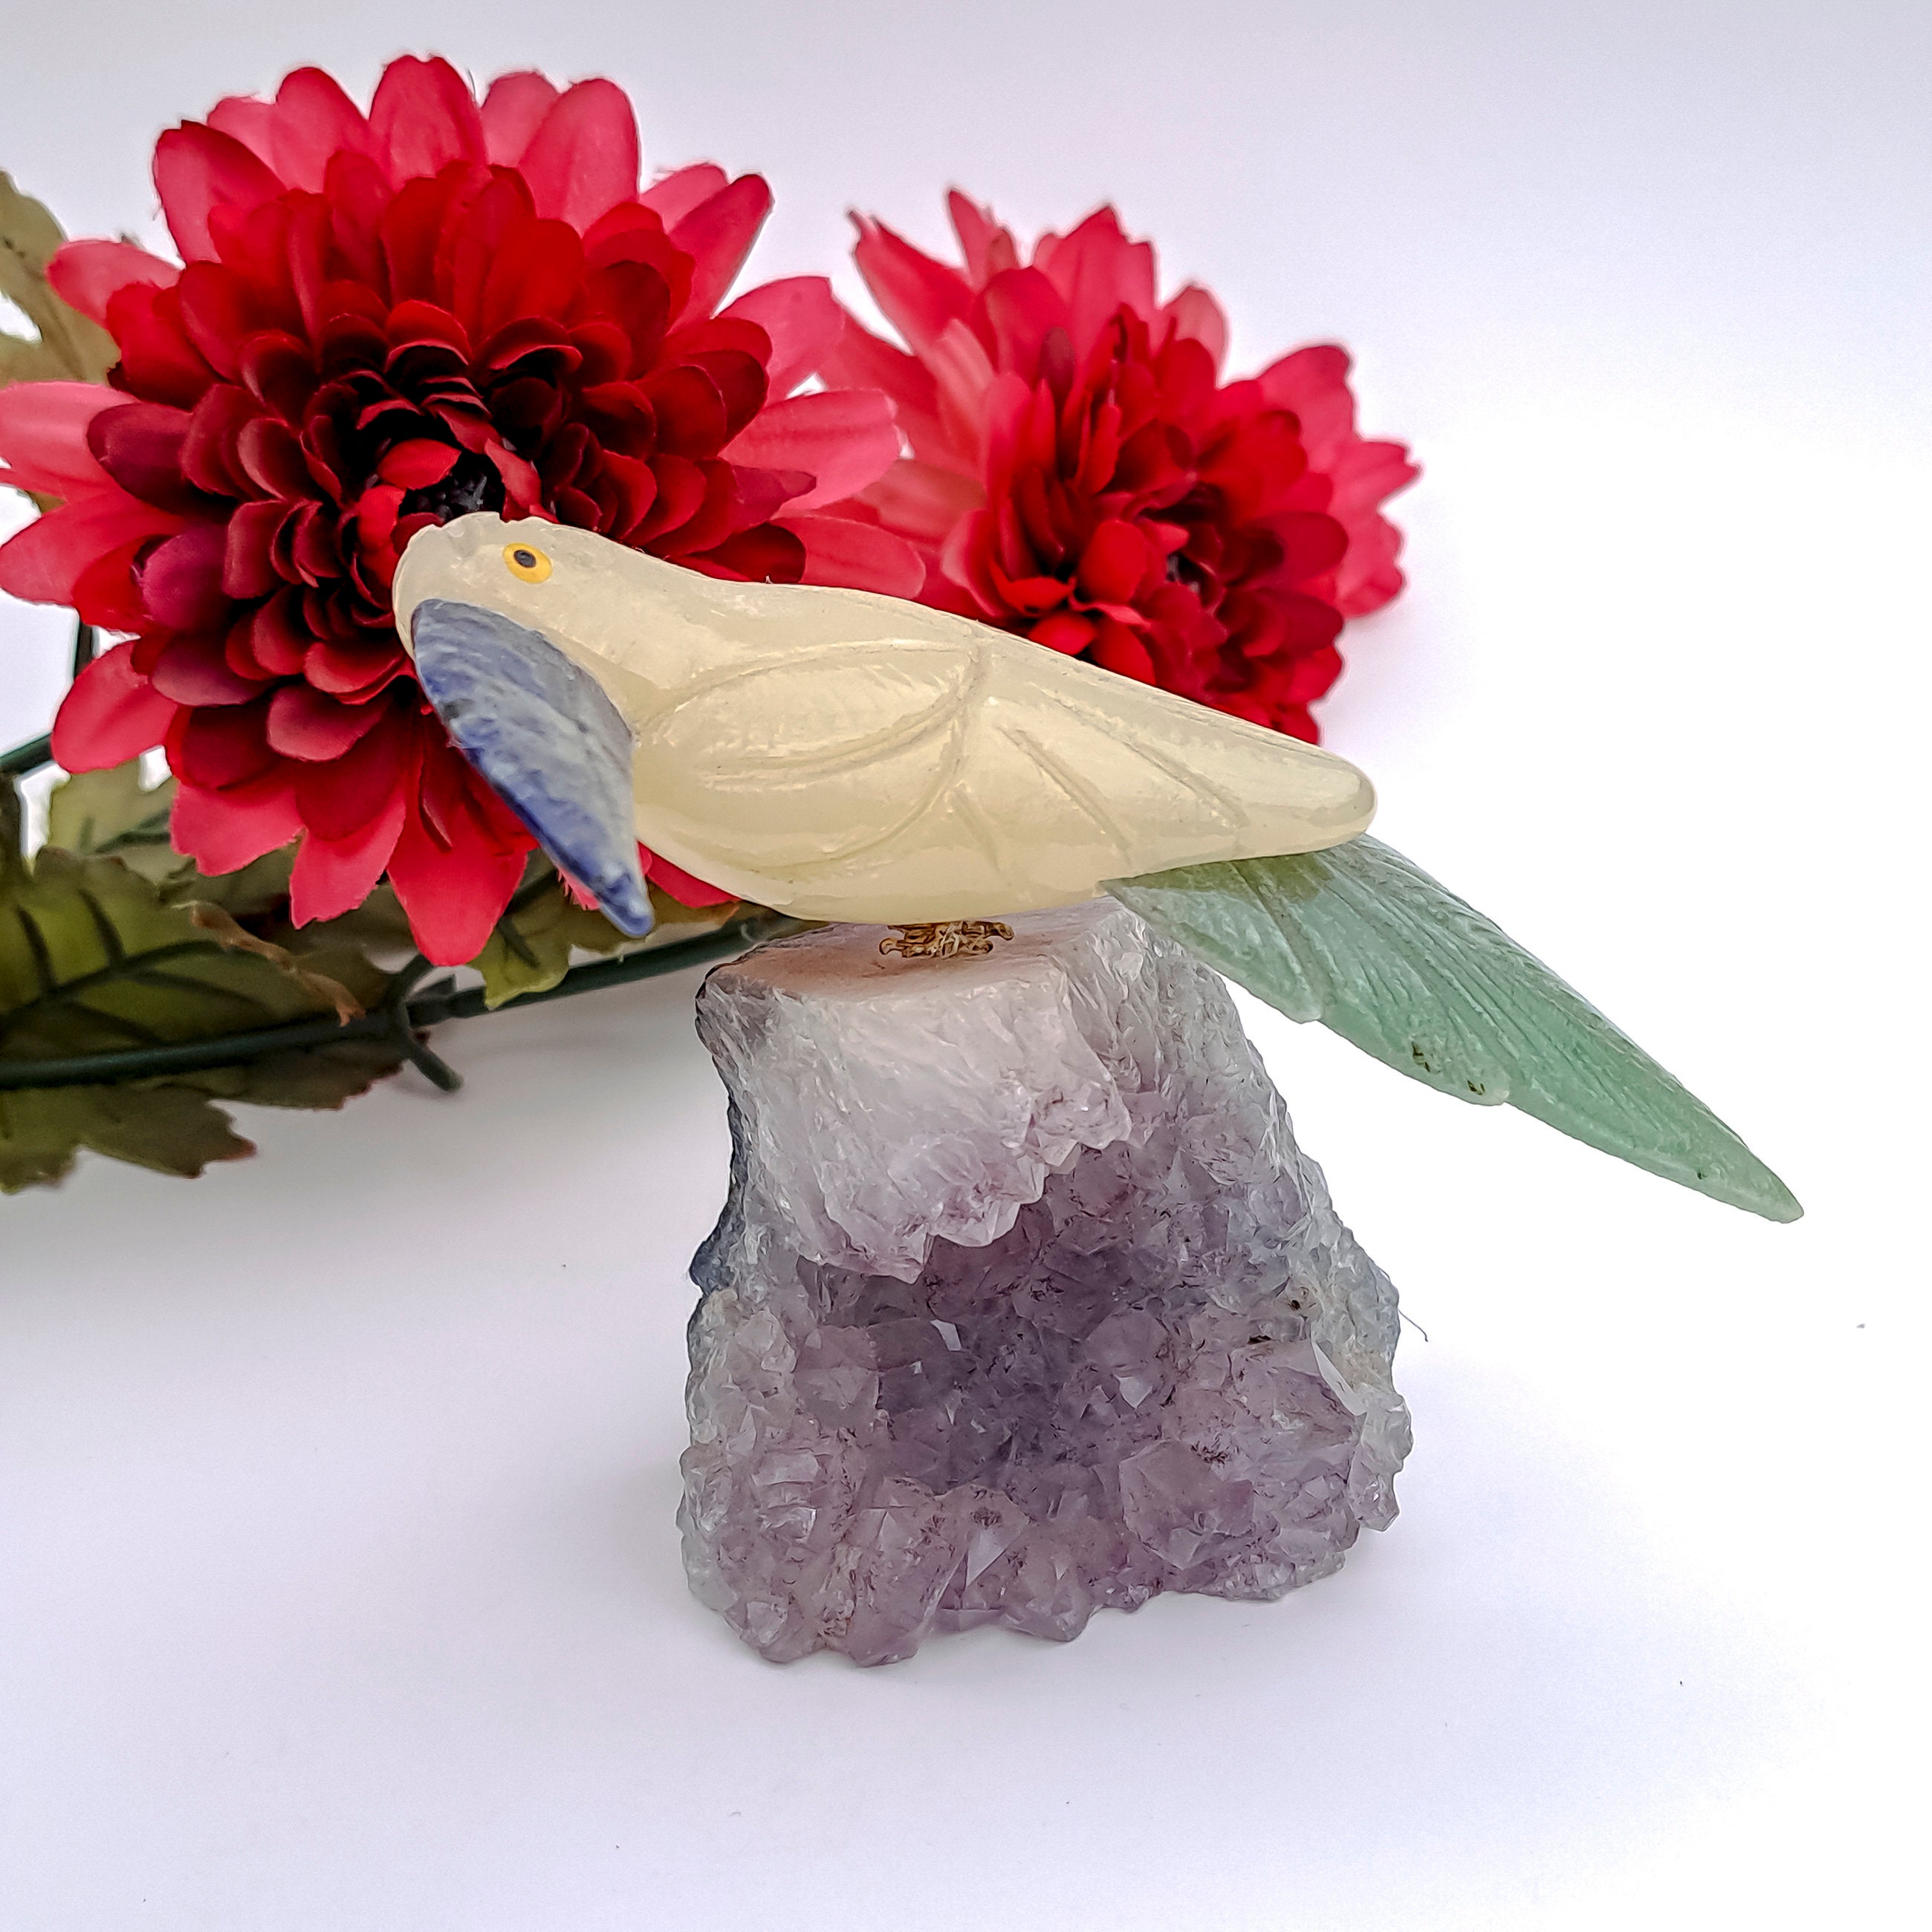 cheap online clearance Rock Crystal Chrystal Bird Sculpture Stand  Sculpture, Rainforest With Tucan Bird, Ivory Amethyst Quartz Crystal  Sculpture on Top of a Cluster of Amethyst